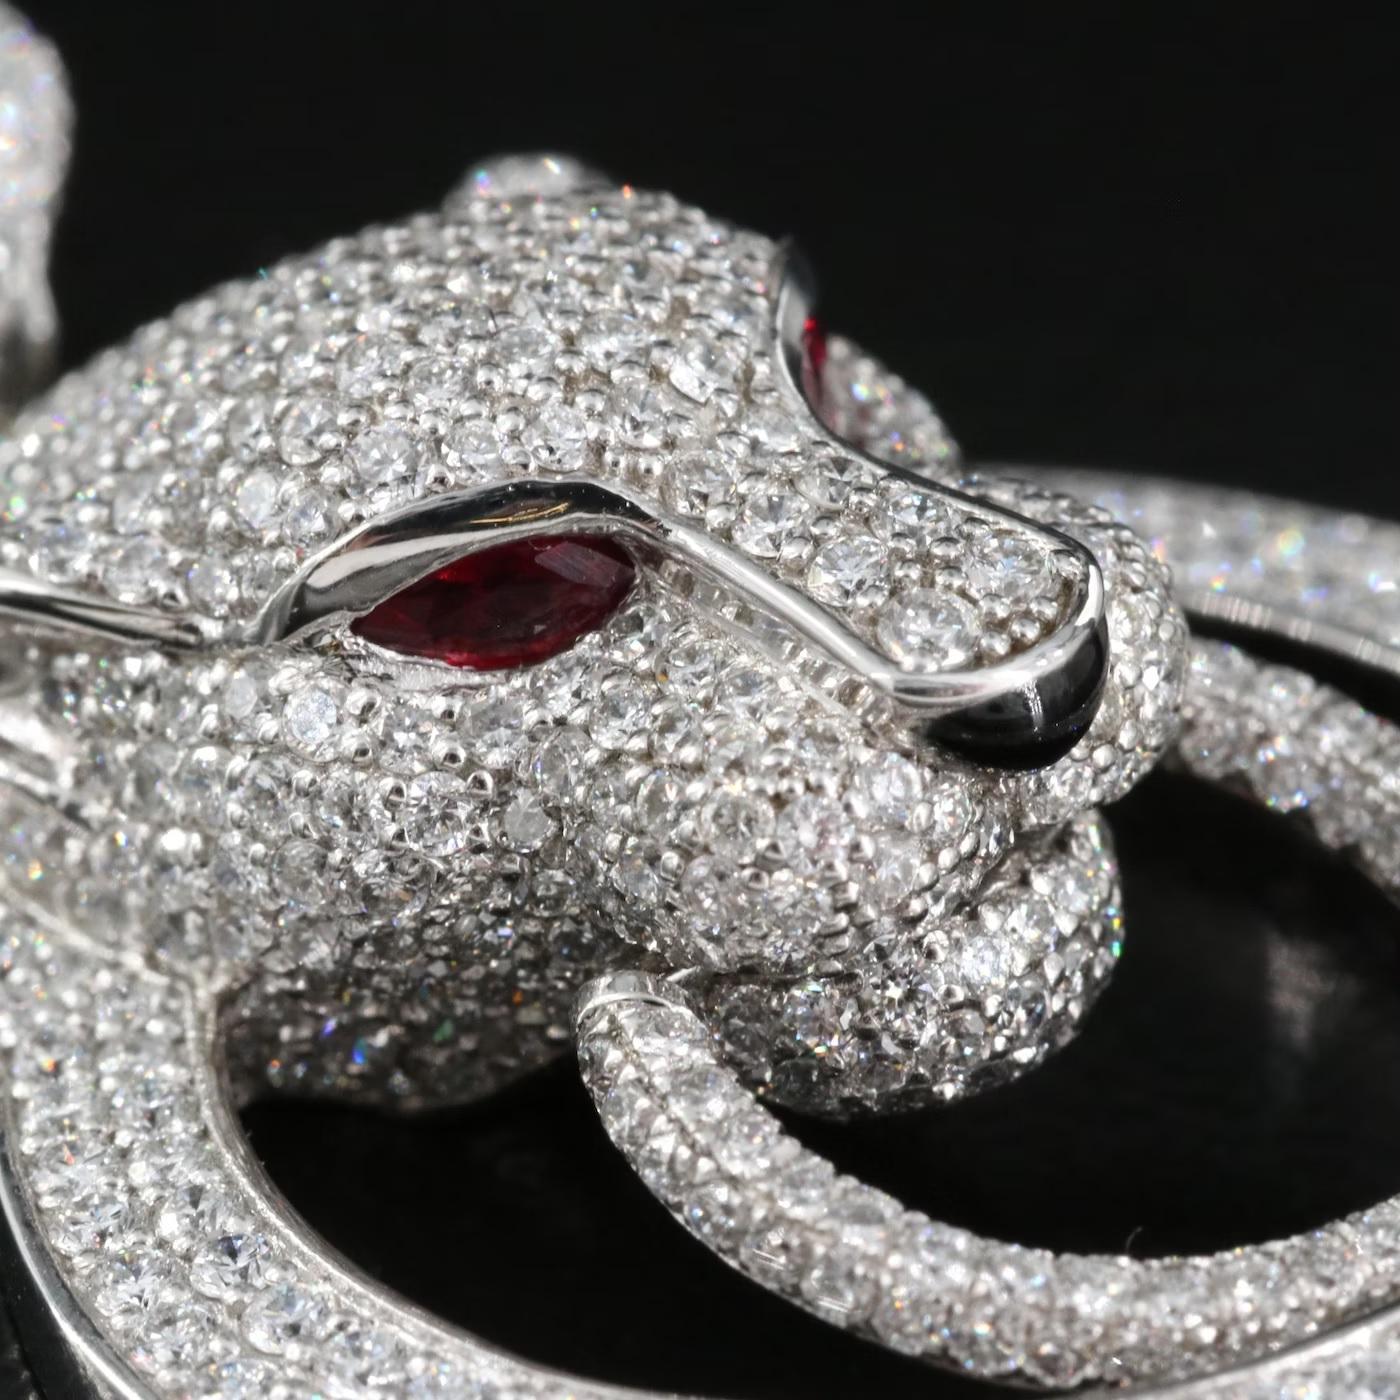 Women's or Men's $22500 / NEW / Massive PLATINUM Panther Panthere 4.55 CWT Diamond & Ruby